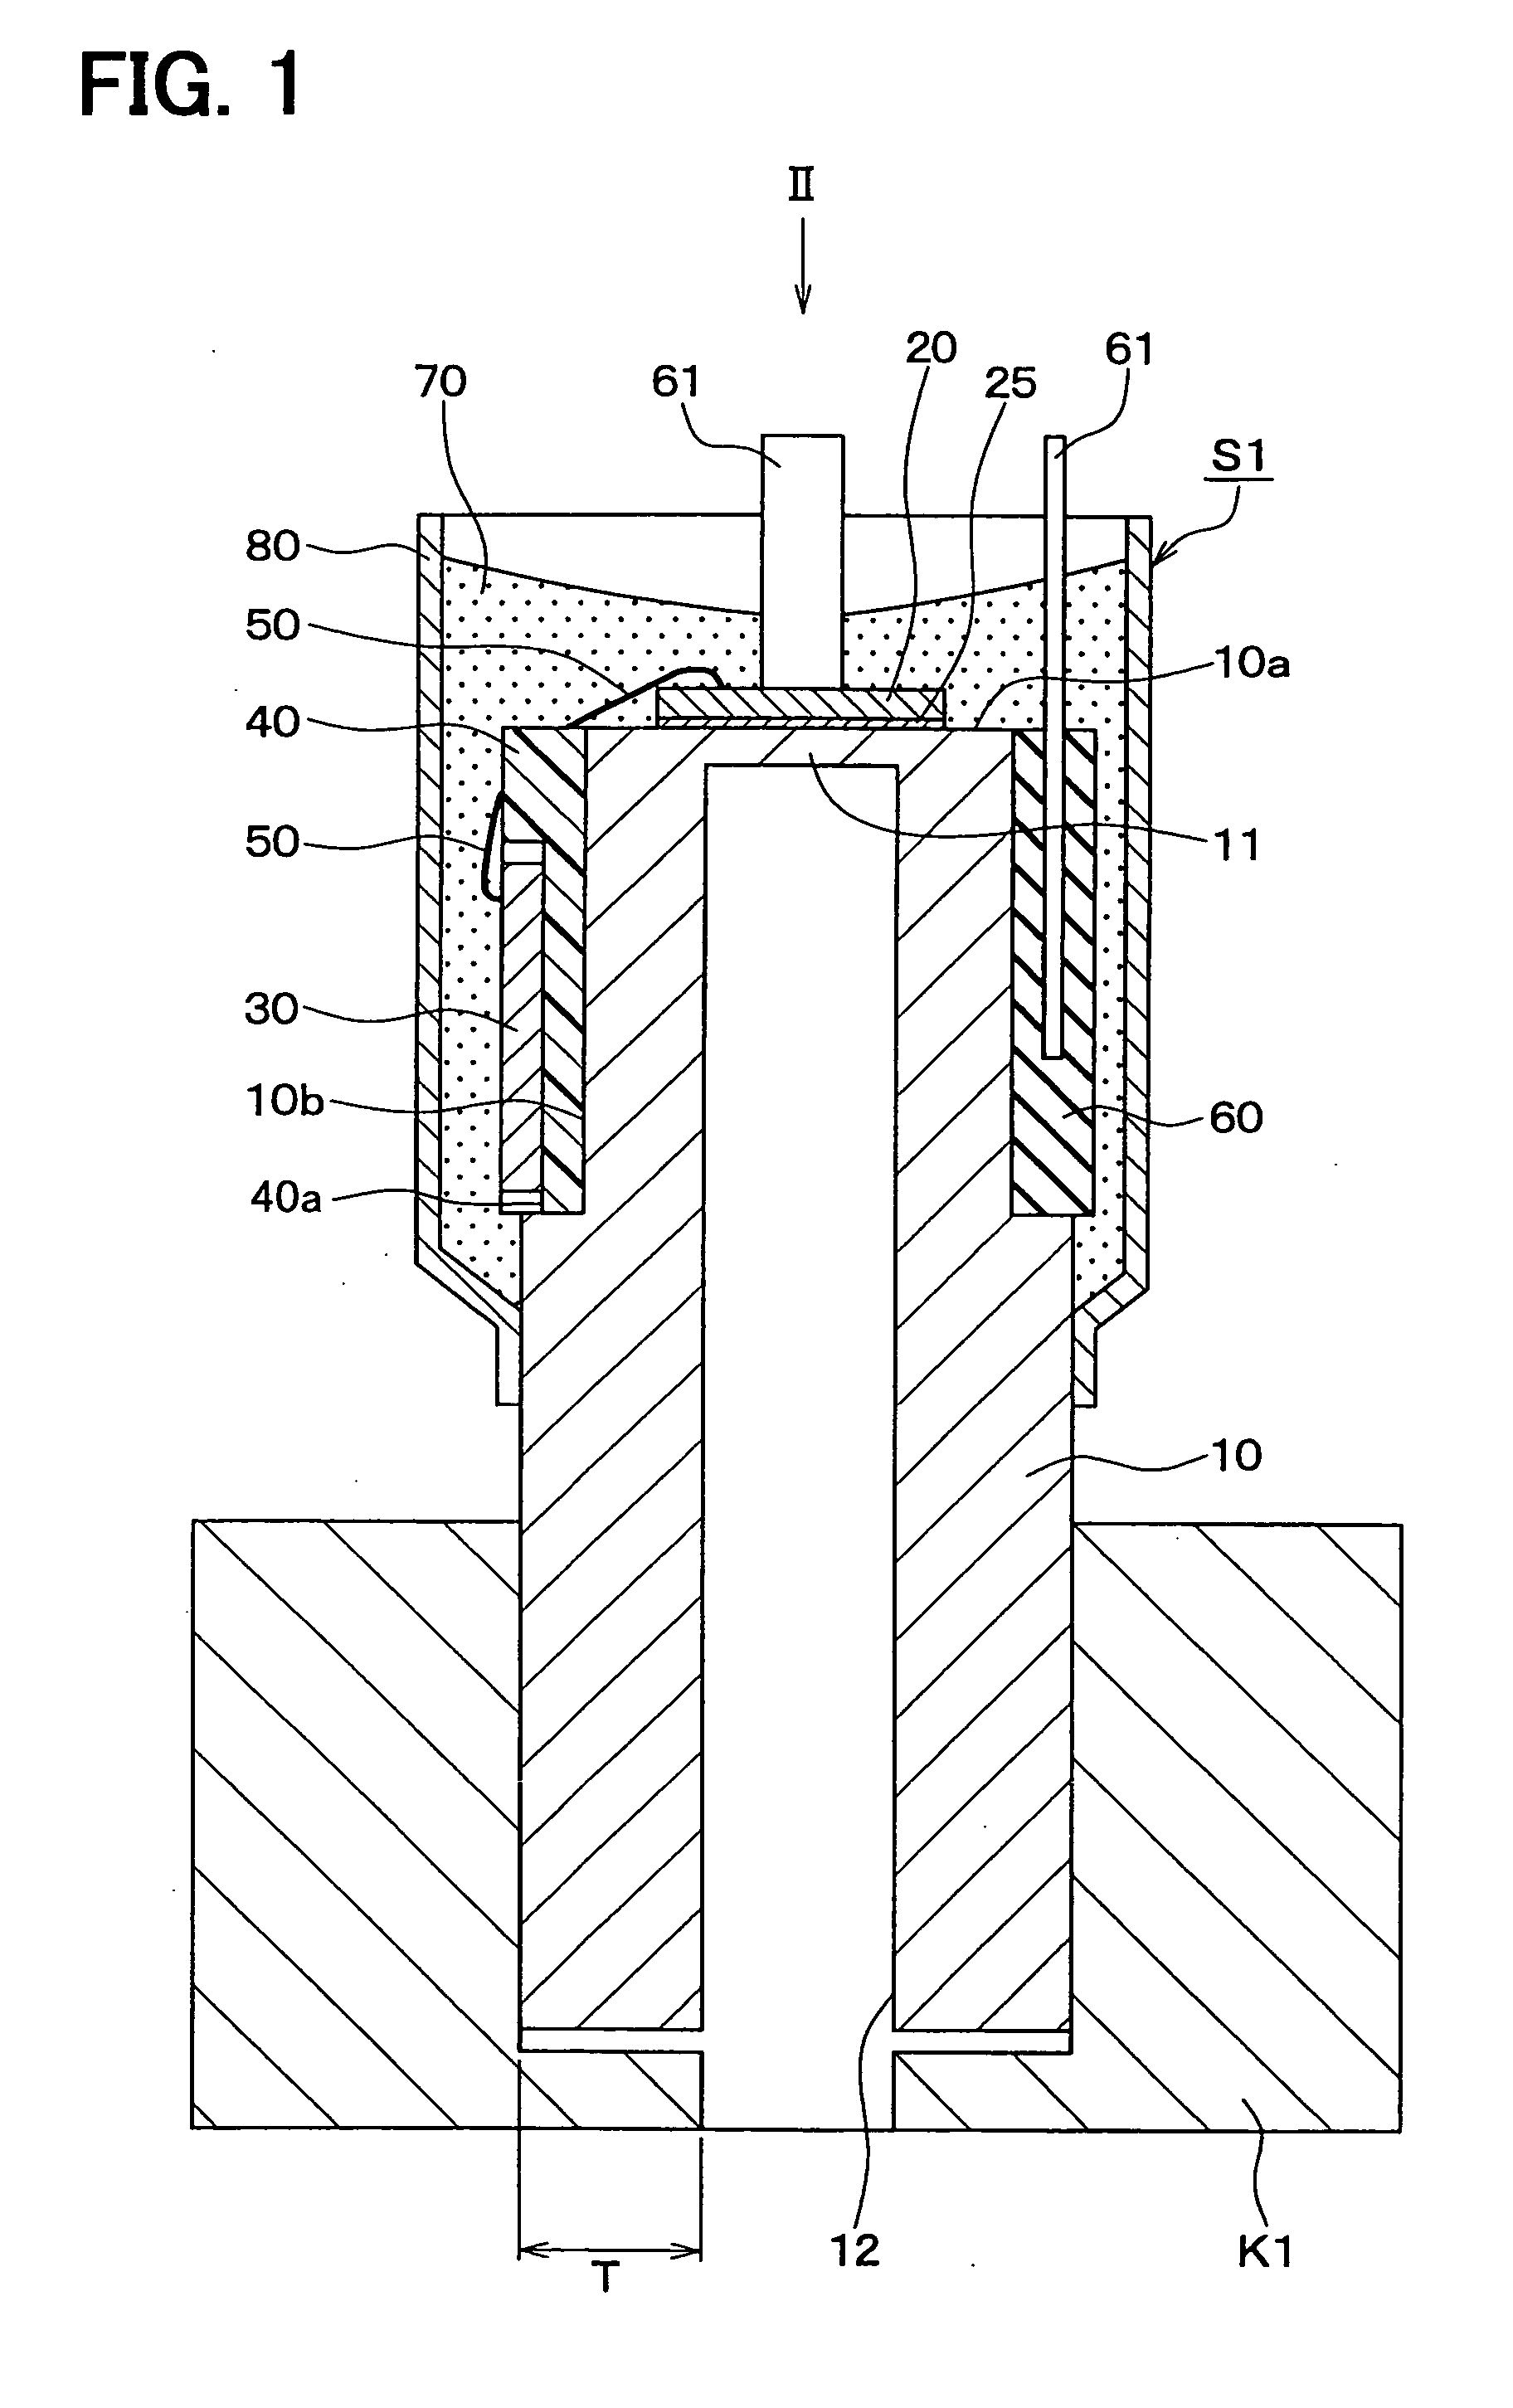 Pressure sensor having sensor chip and signal processing circuit mounted on a common stem